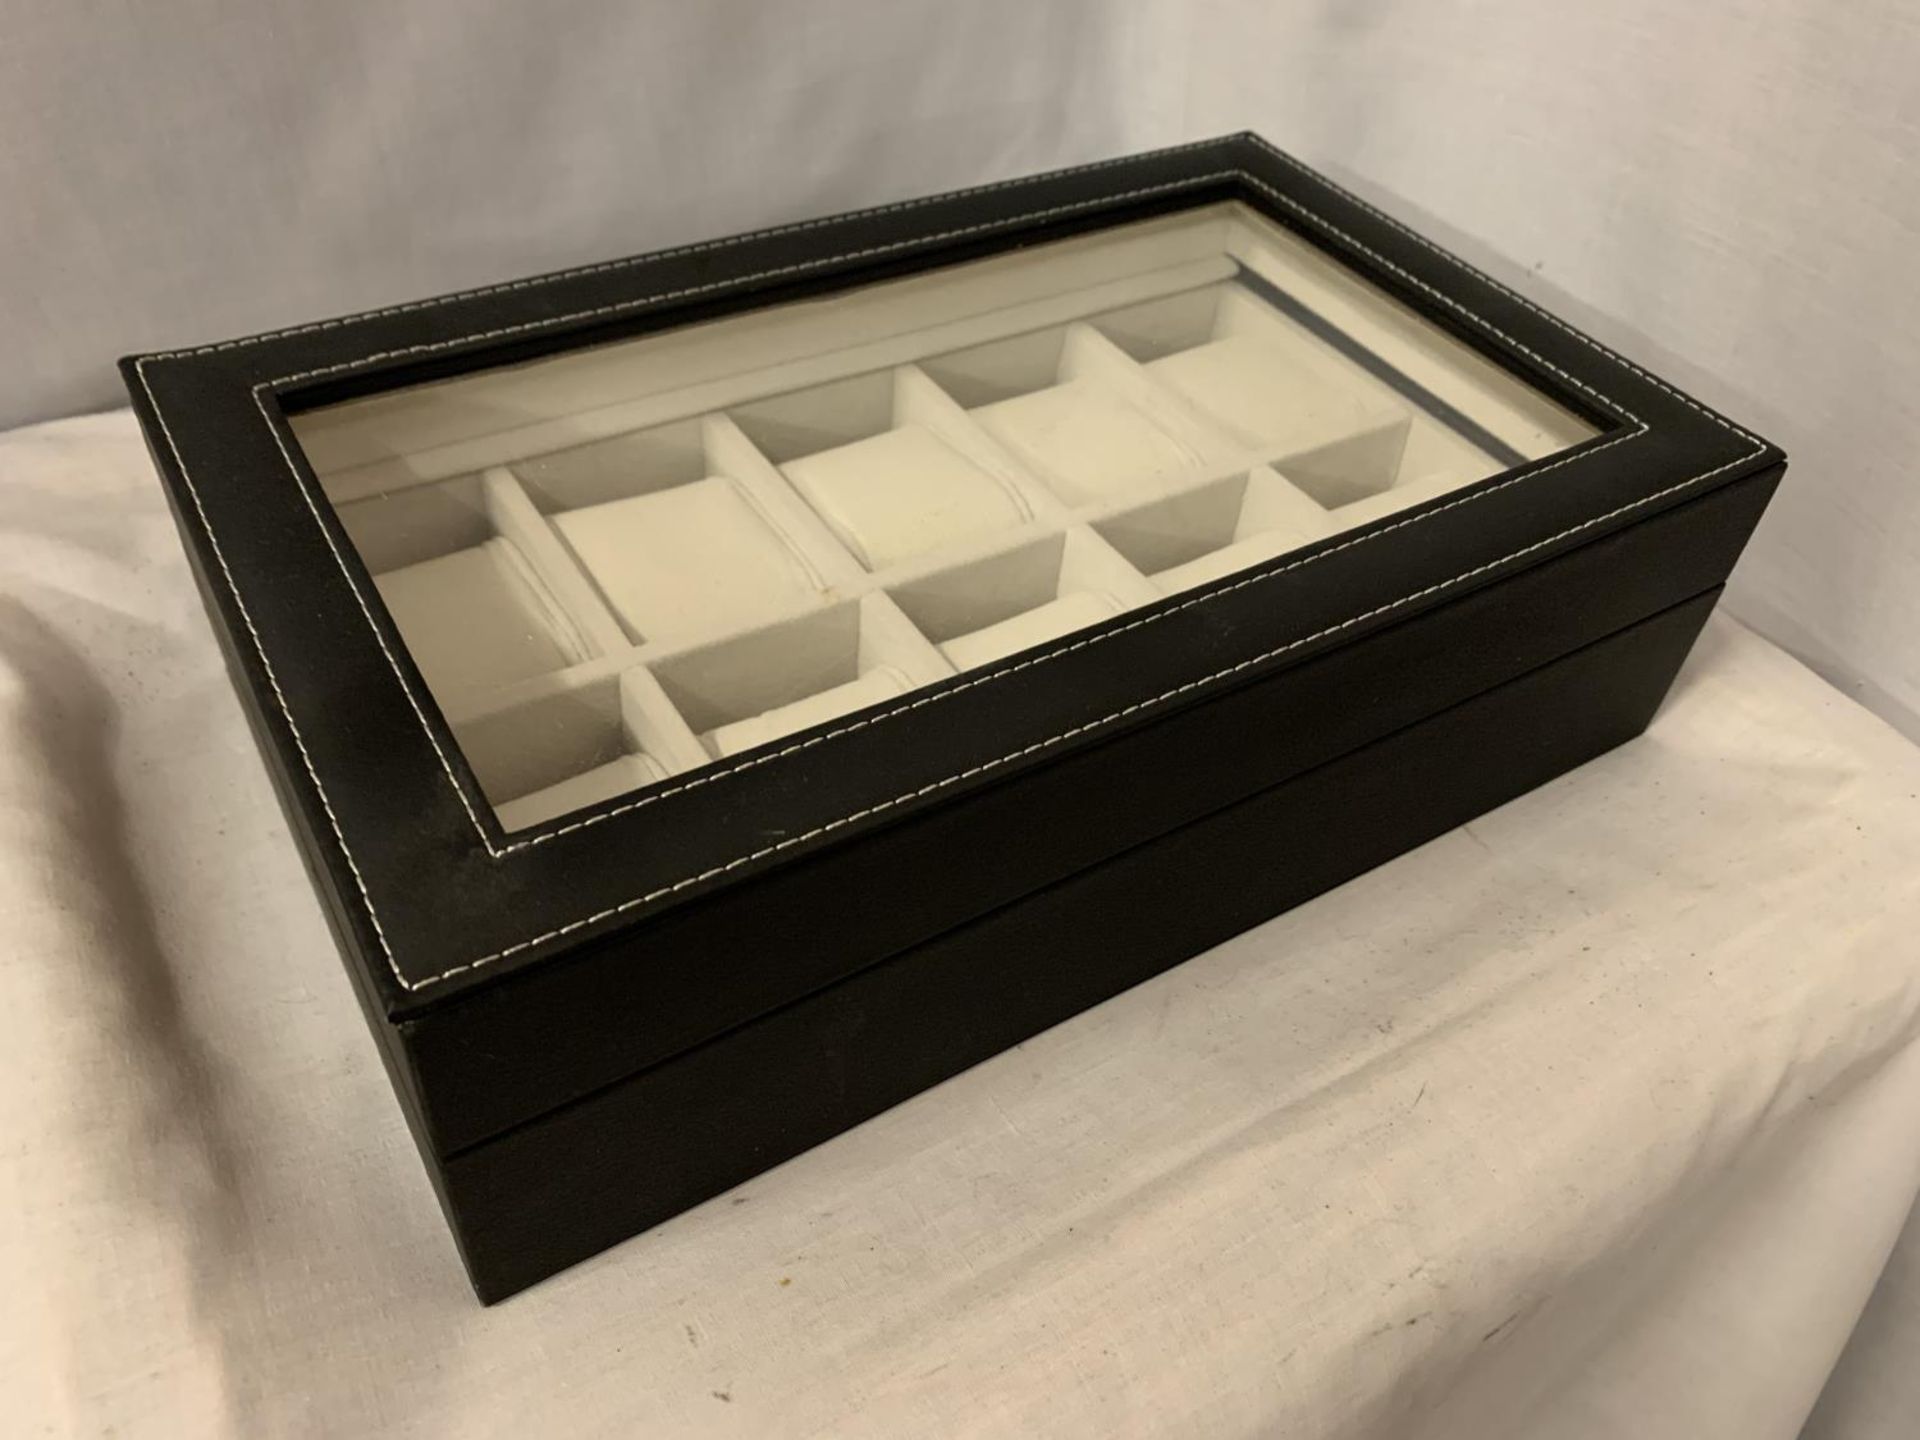 A FAUX LEATHER WATCH DISPLAY PLASTIC LIDDED CASE TO DISPLAY TEN WATCHES